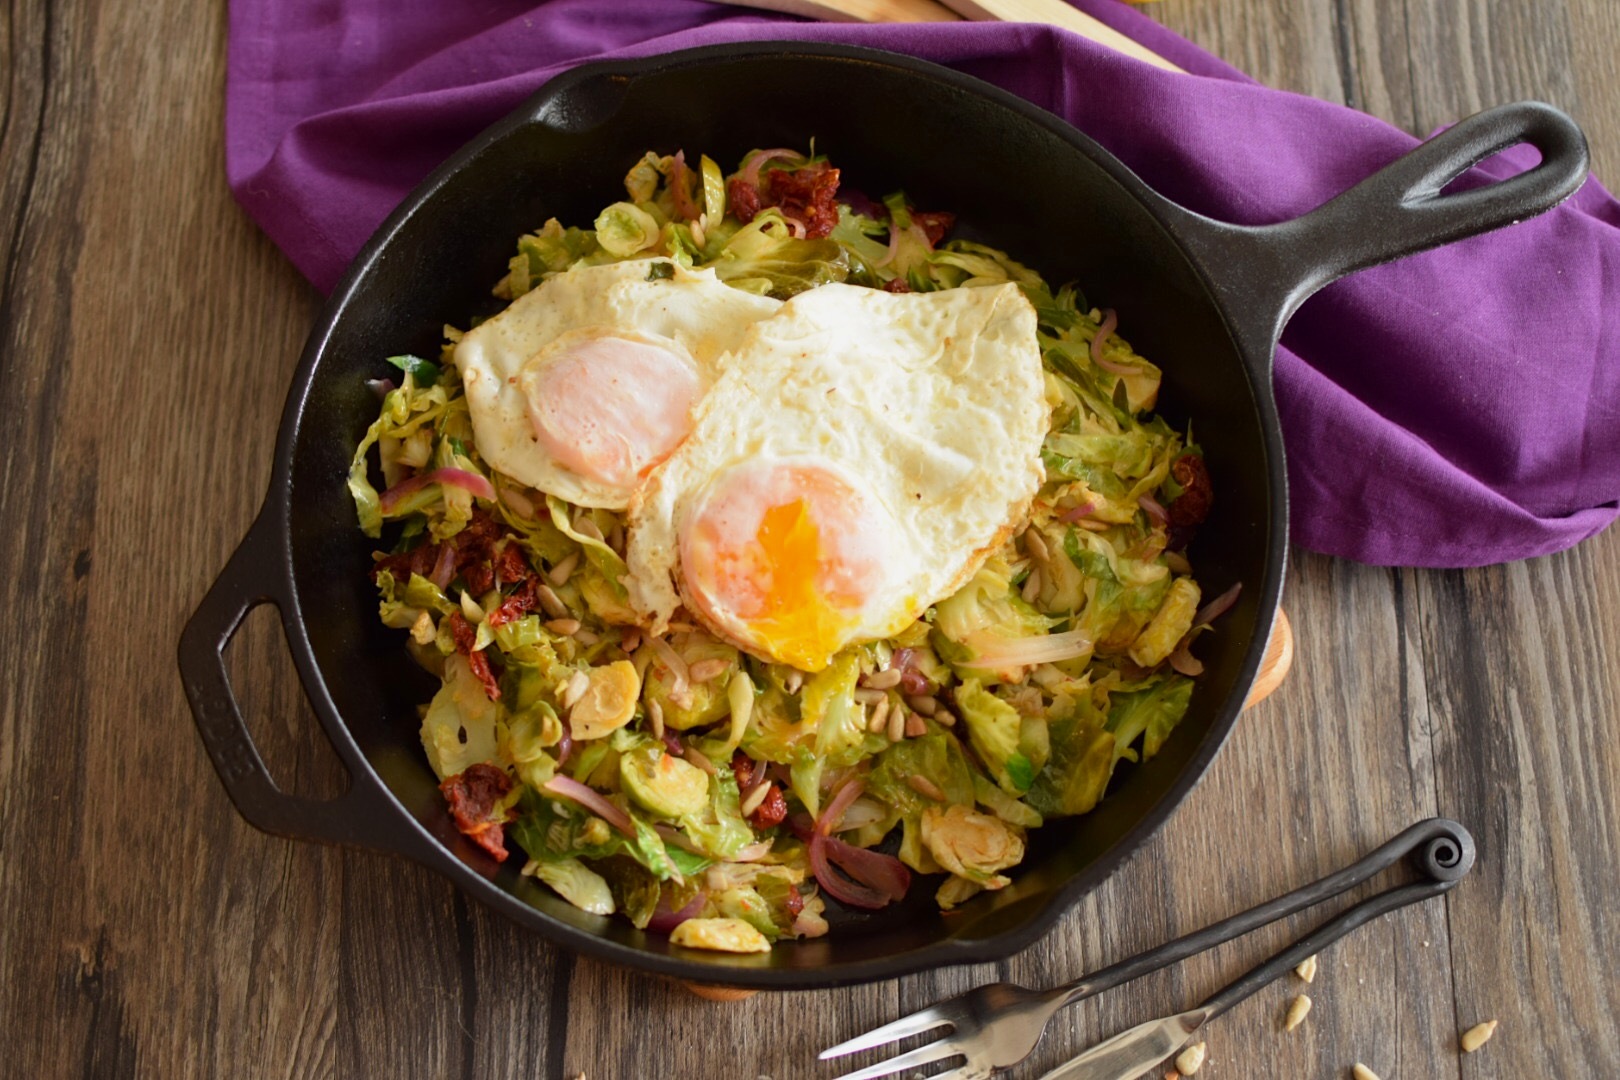 Eggs over Easy with Shredded Brussels Sprouts